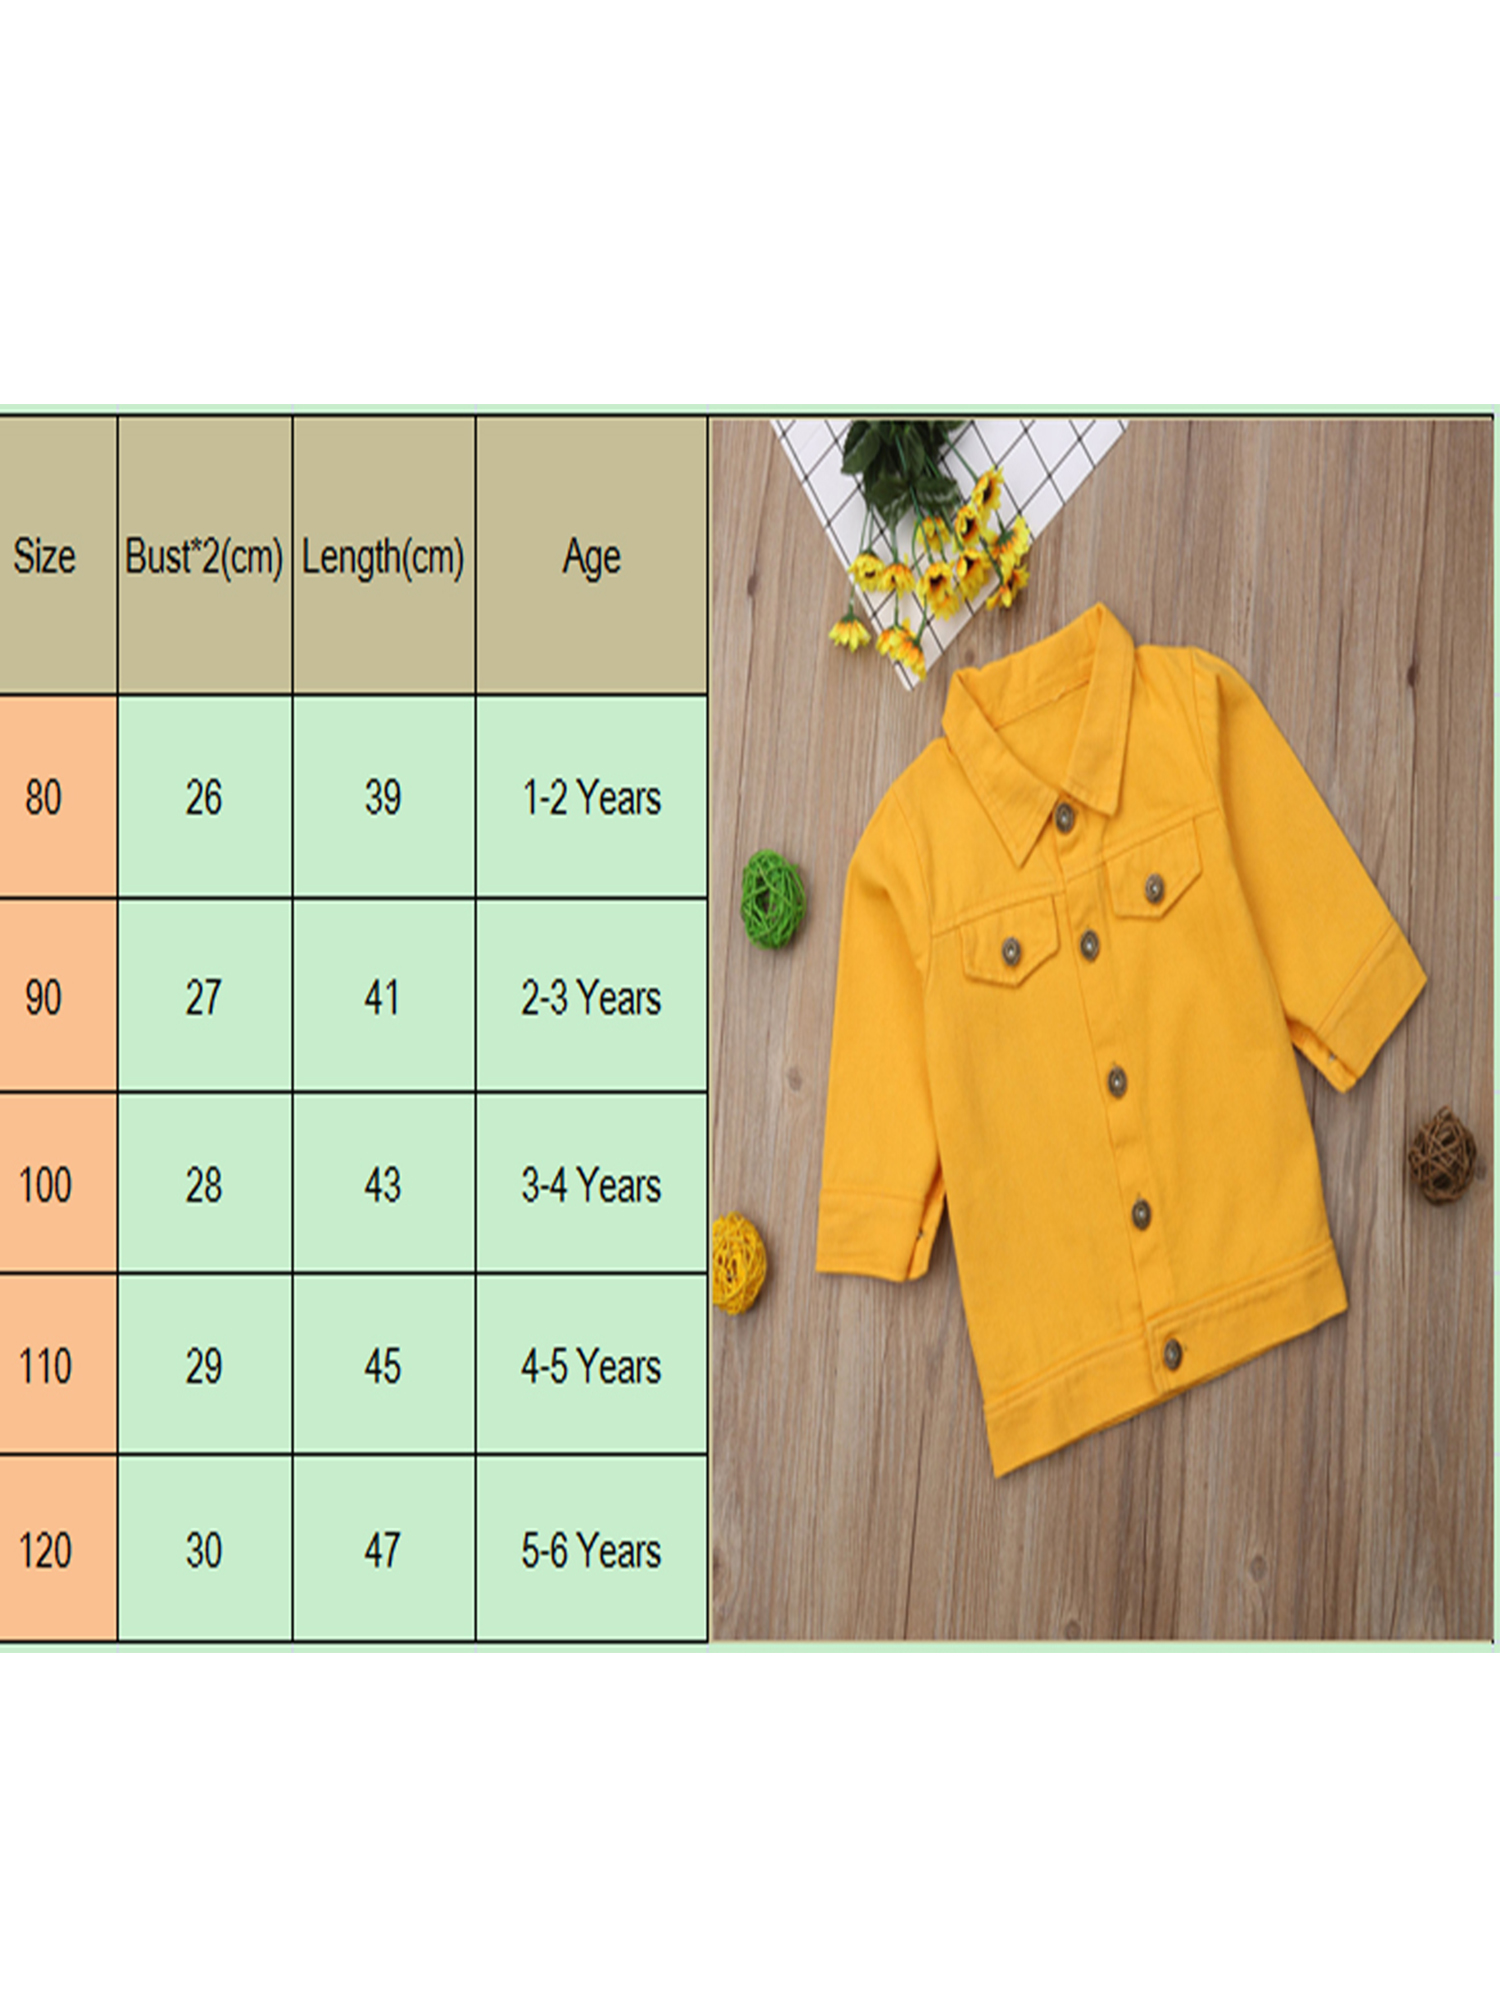 Pudcoco Kids Baby Girl Jeans Outerwear Coat Denim Jacket Tops Outfits Clothes - image 2 of 6